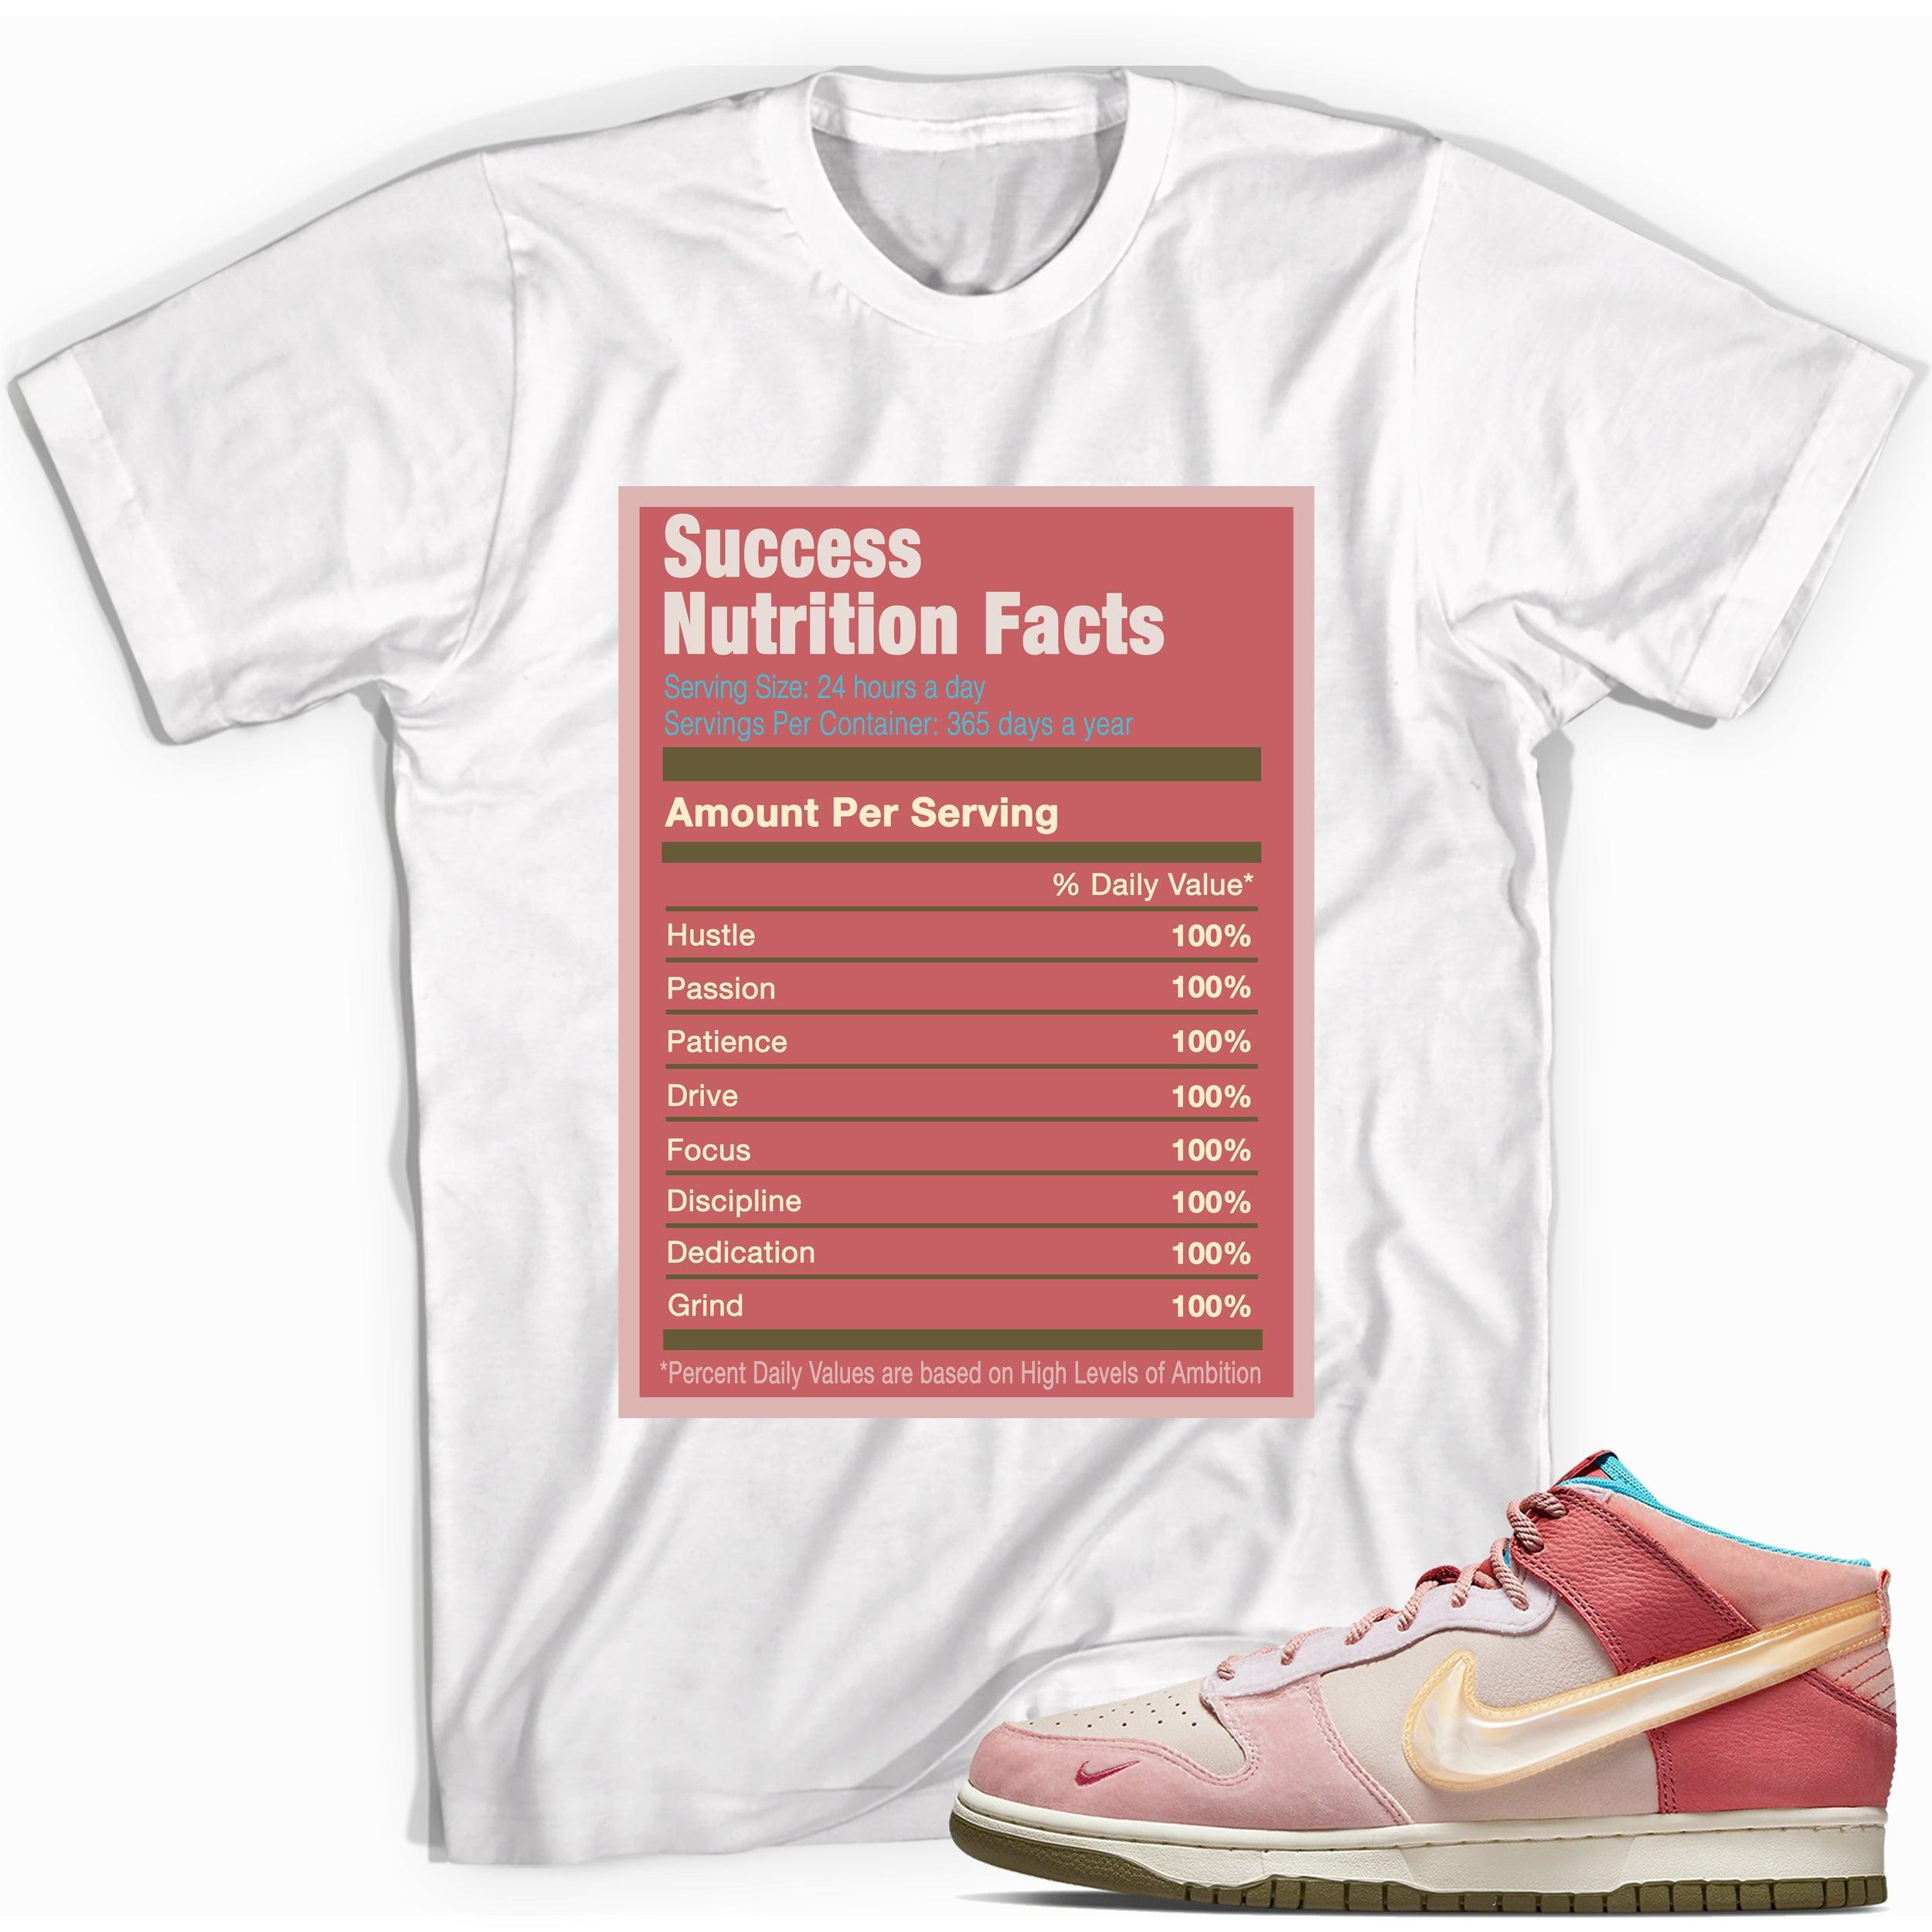 Success Nutrition Shirt Dunks Mid Social Status Free Lunch Strawberry Milk Sneakers photo